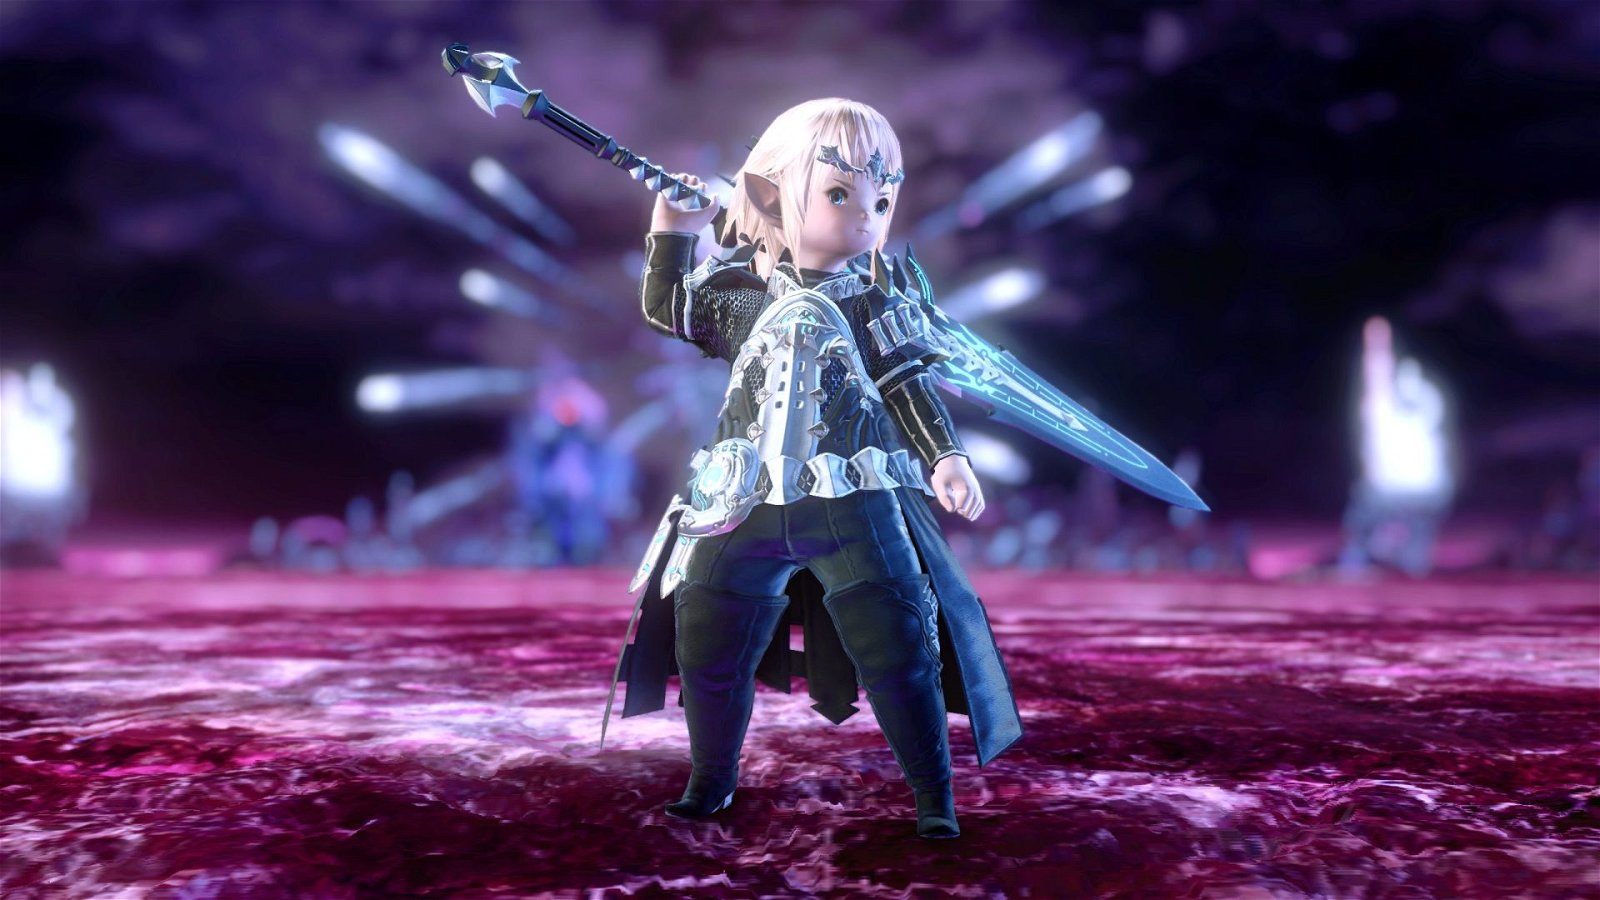 Final Fantasy Xiv Gshade Mod Improves Aesthetic Amp Adds Malware For Players 23020702